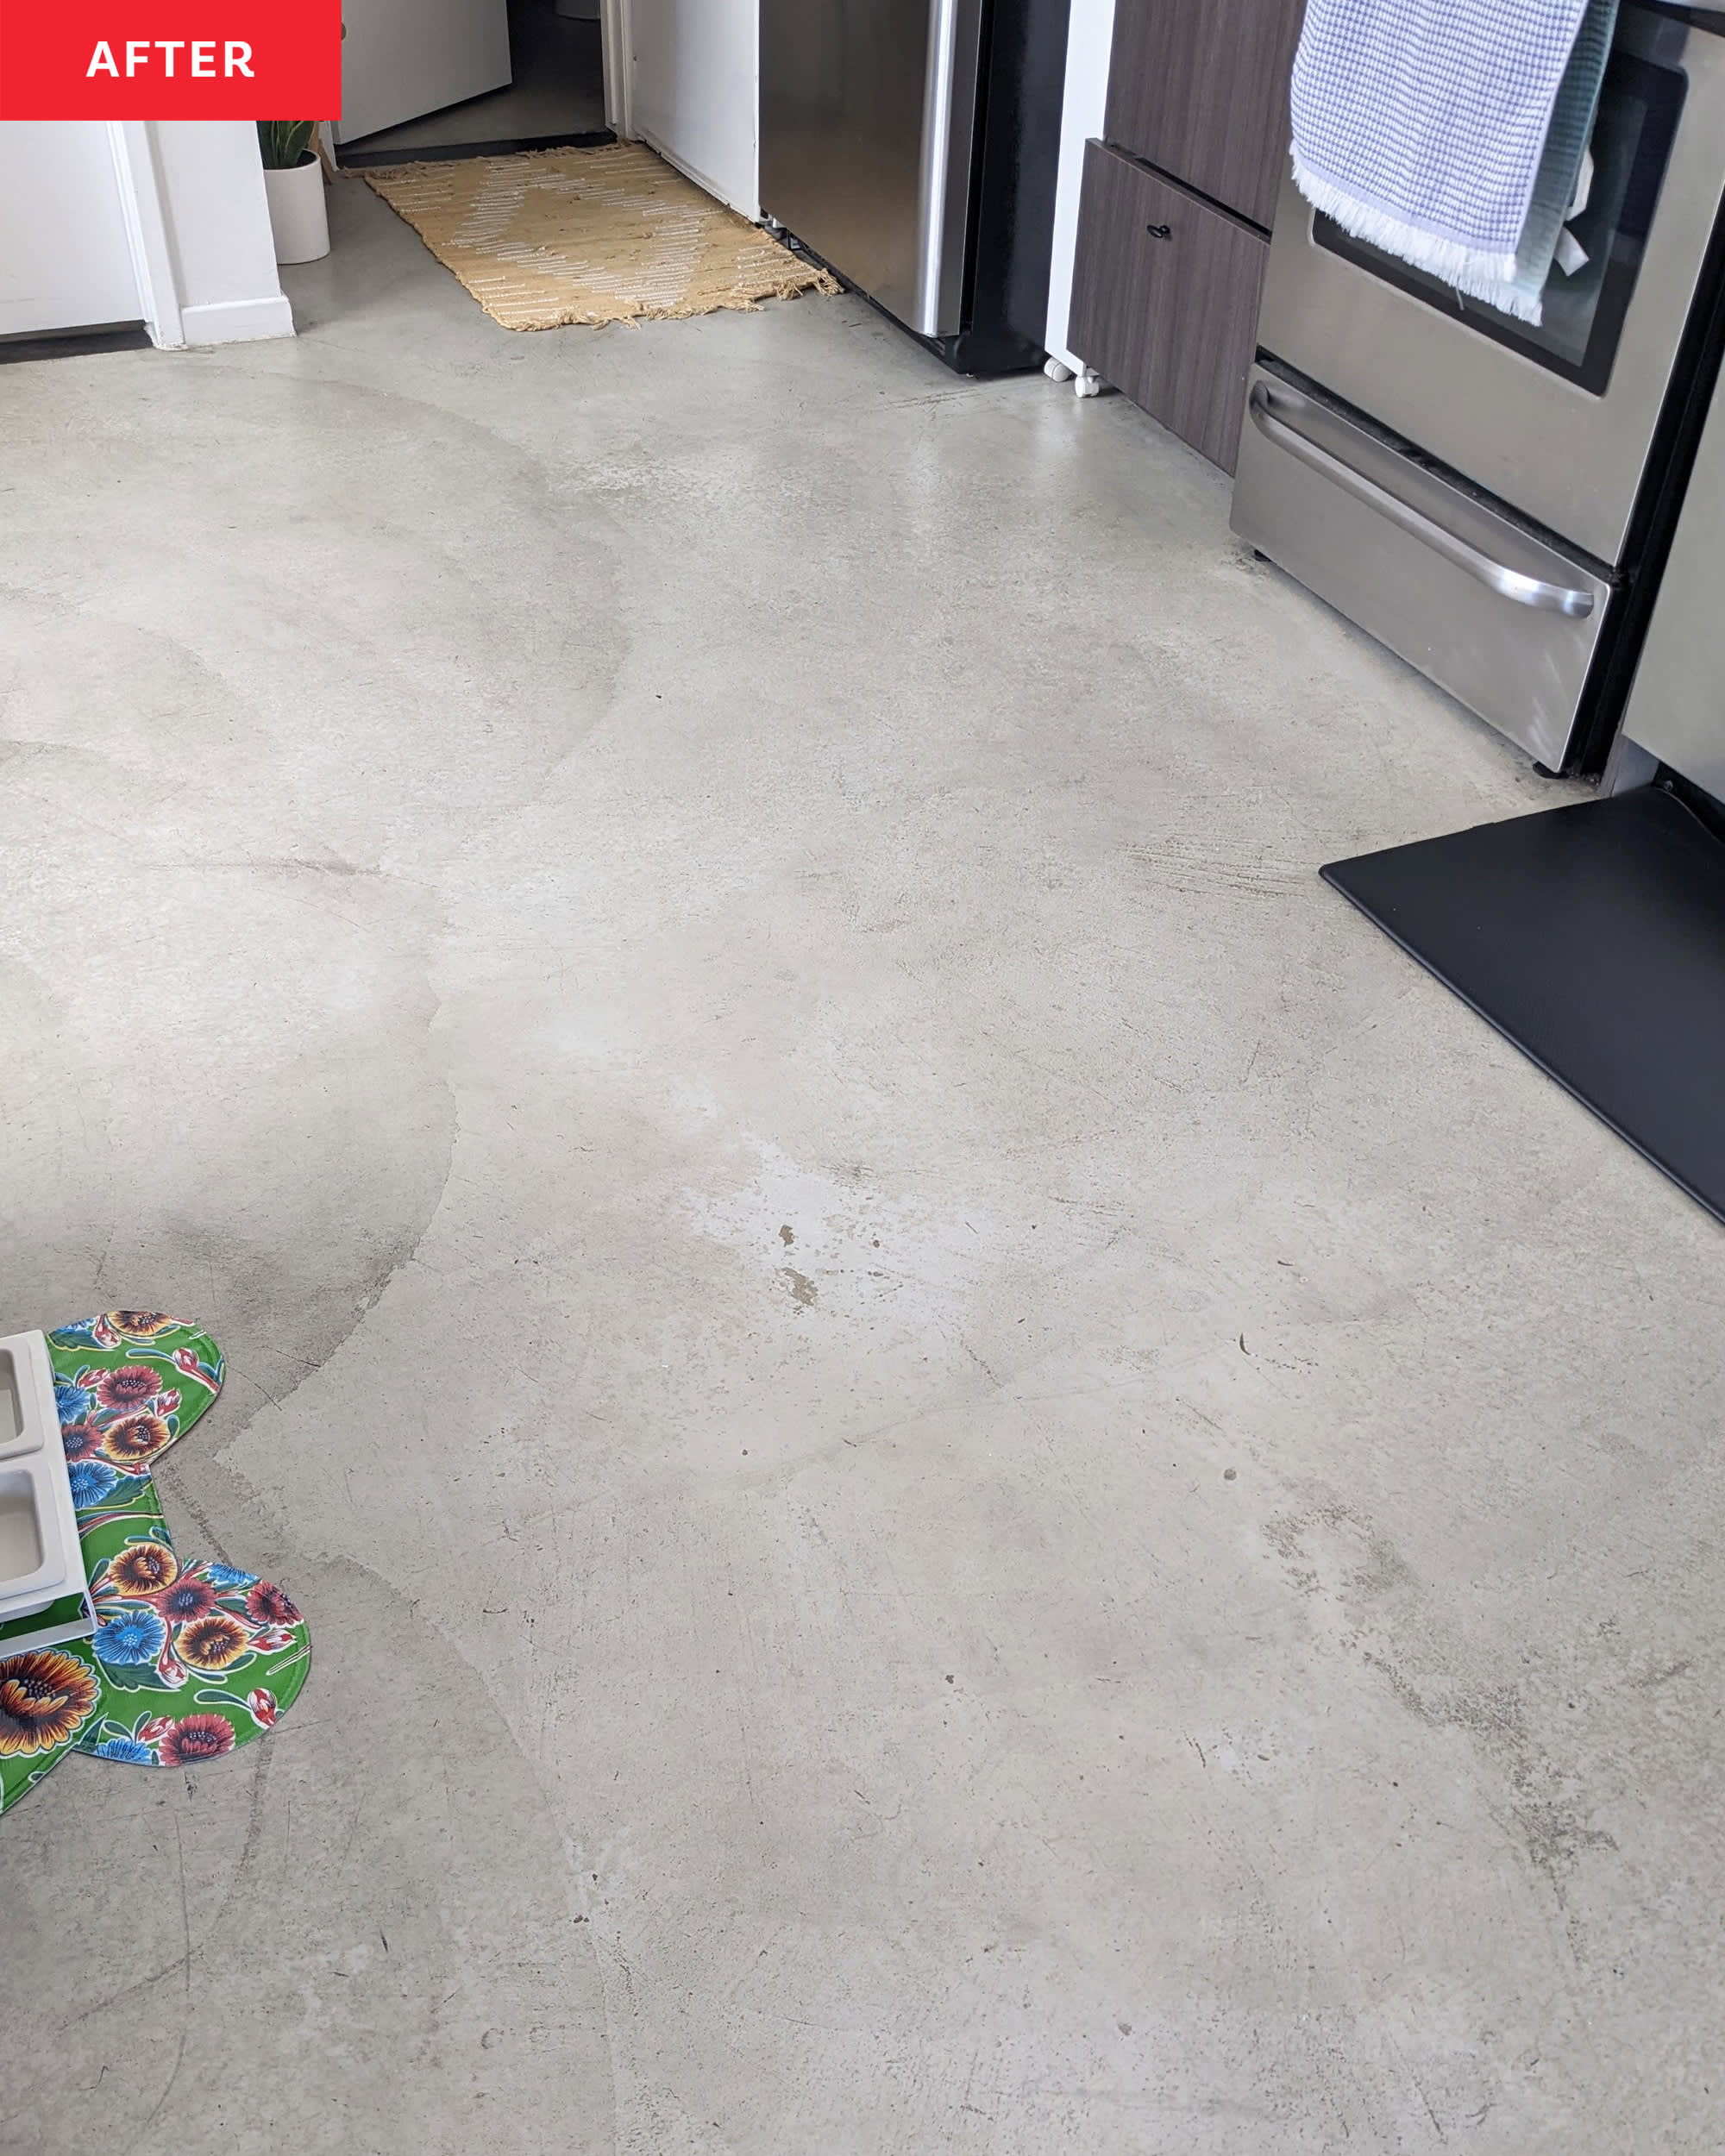 https://cdn.apartmenttherapy.info/image/upload/v1693336977/at/organize-clean/before-after/o-cedar-floor-cleaning-pacs/ocedar-after.jpg